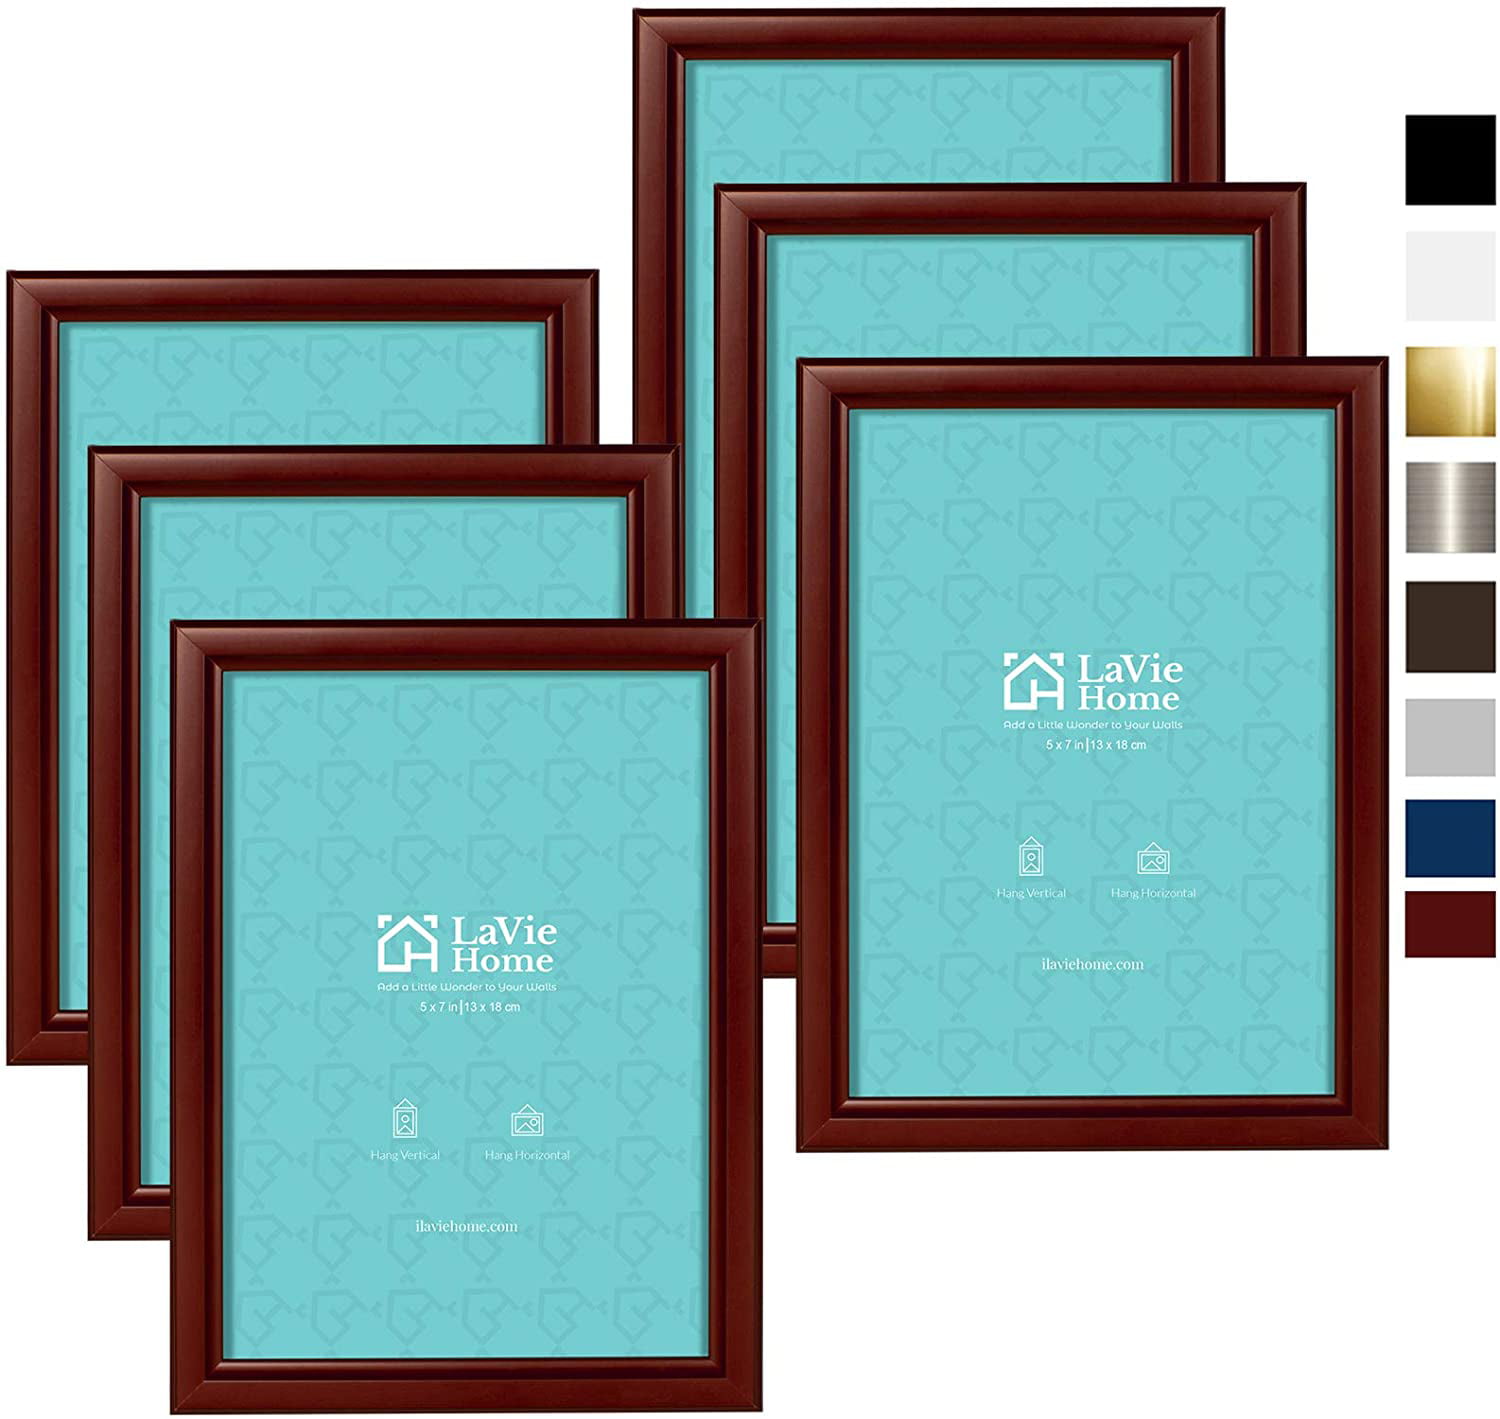 5x7 Picture Frames Rustic Fits 5 by 7 Glass Shabby Chic Wall Tabletop Photo Dispay 6Packs 